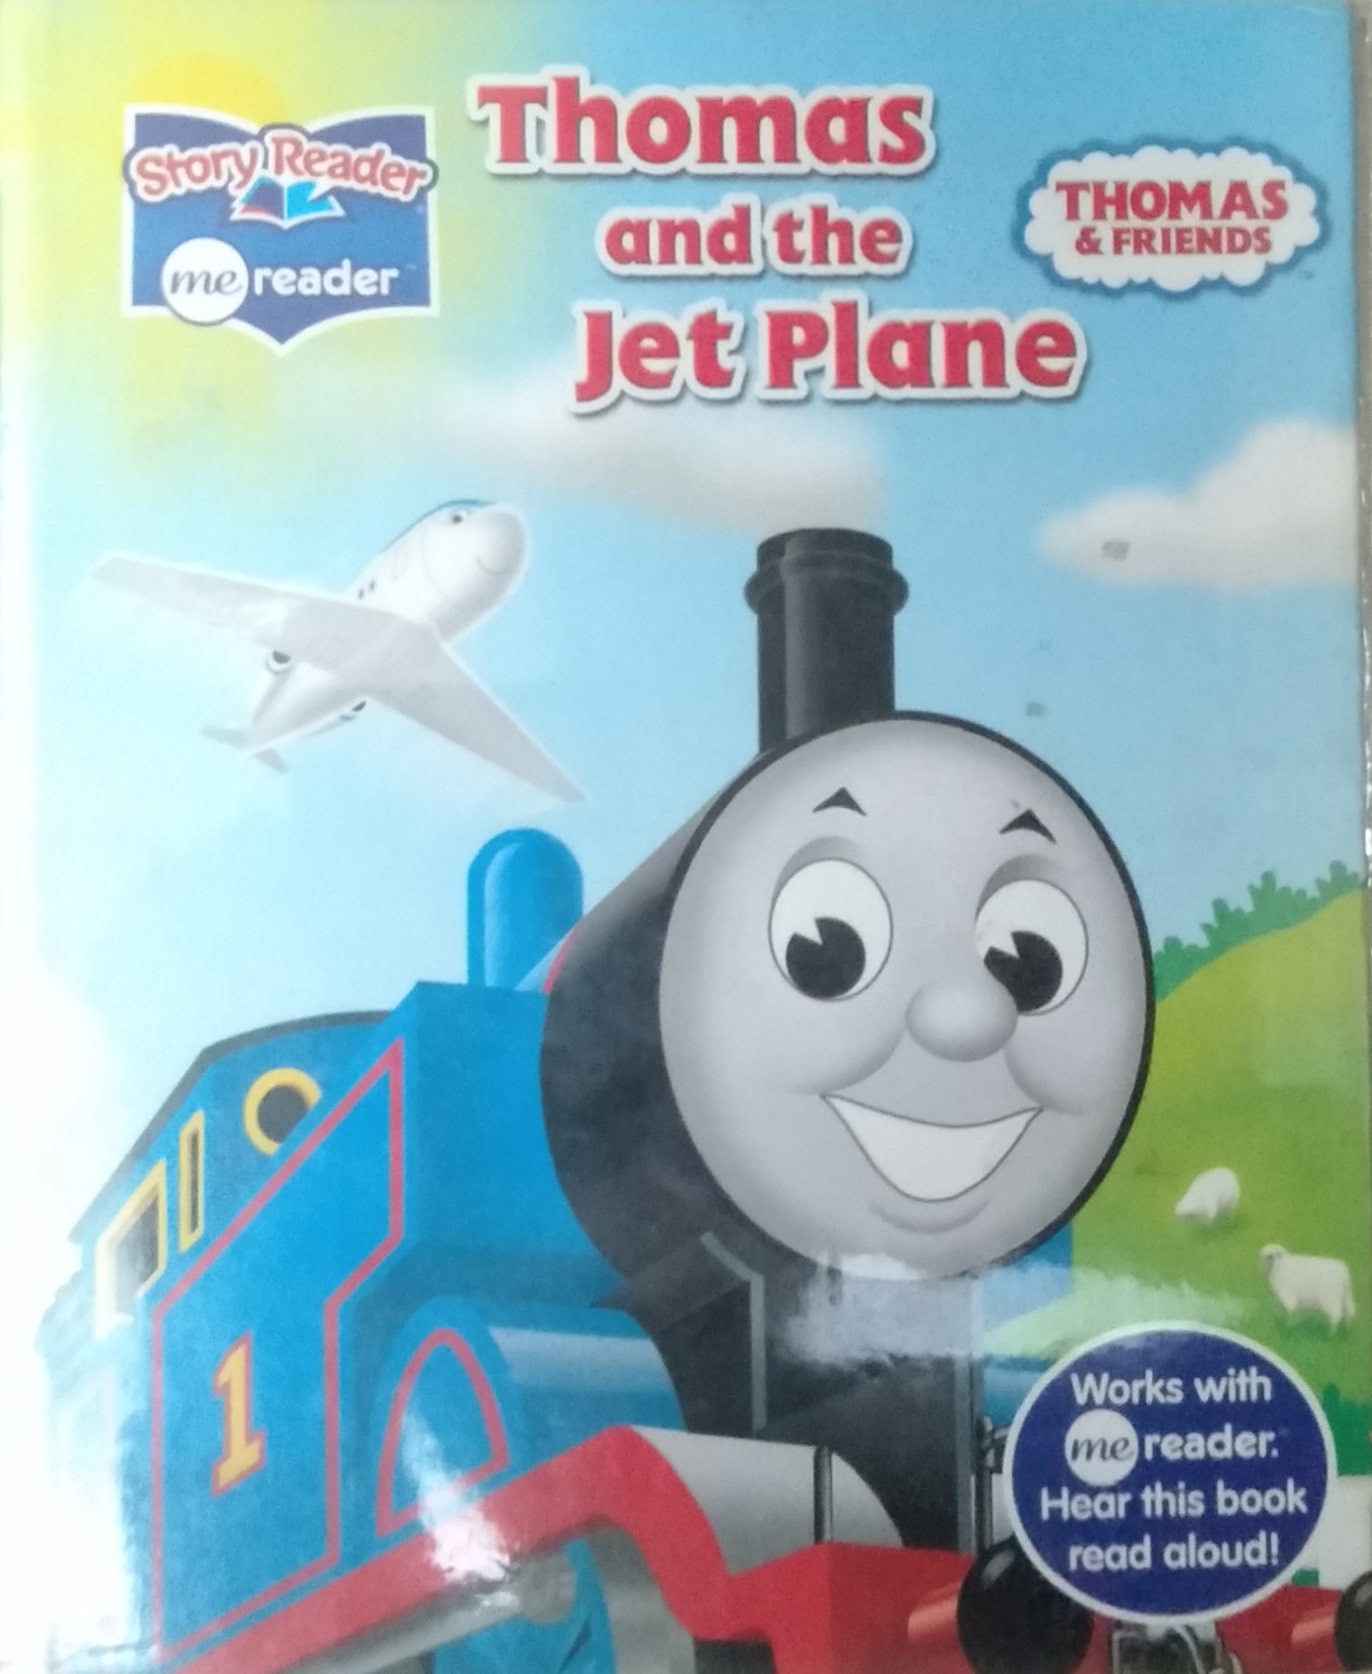 IMG : Thomas and friends - Thomas and the Jet Plane